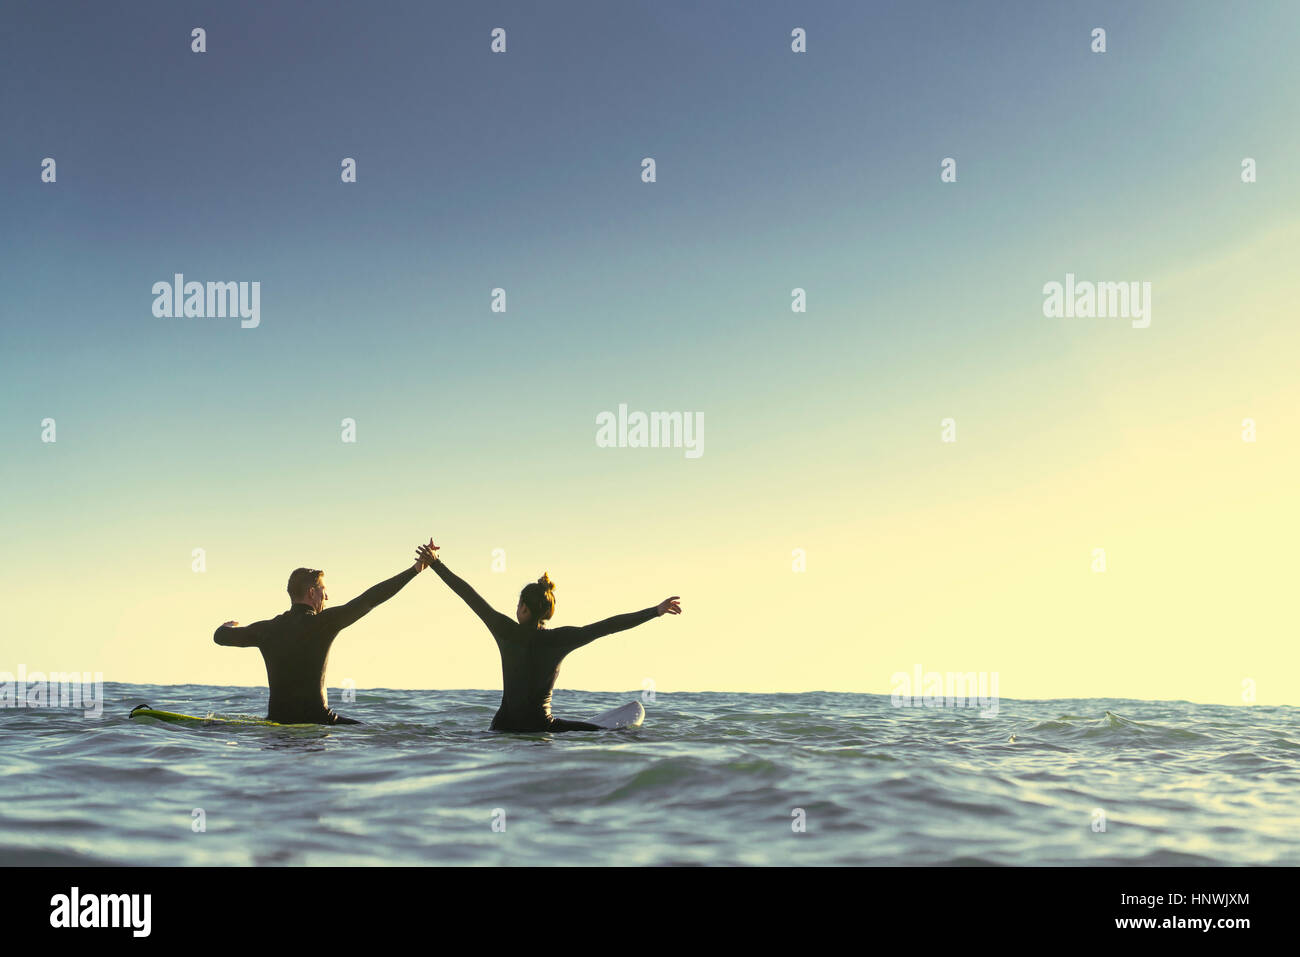 Surfing couple on surfboards holding hands in sea, Newport Beach, California, USA Stock Photo